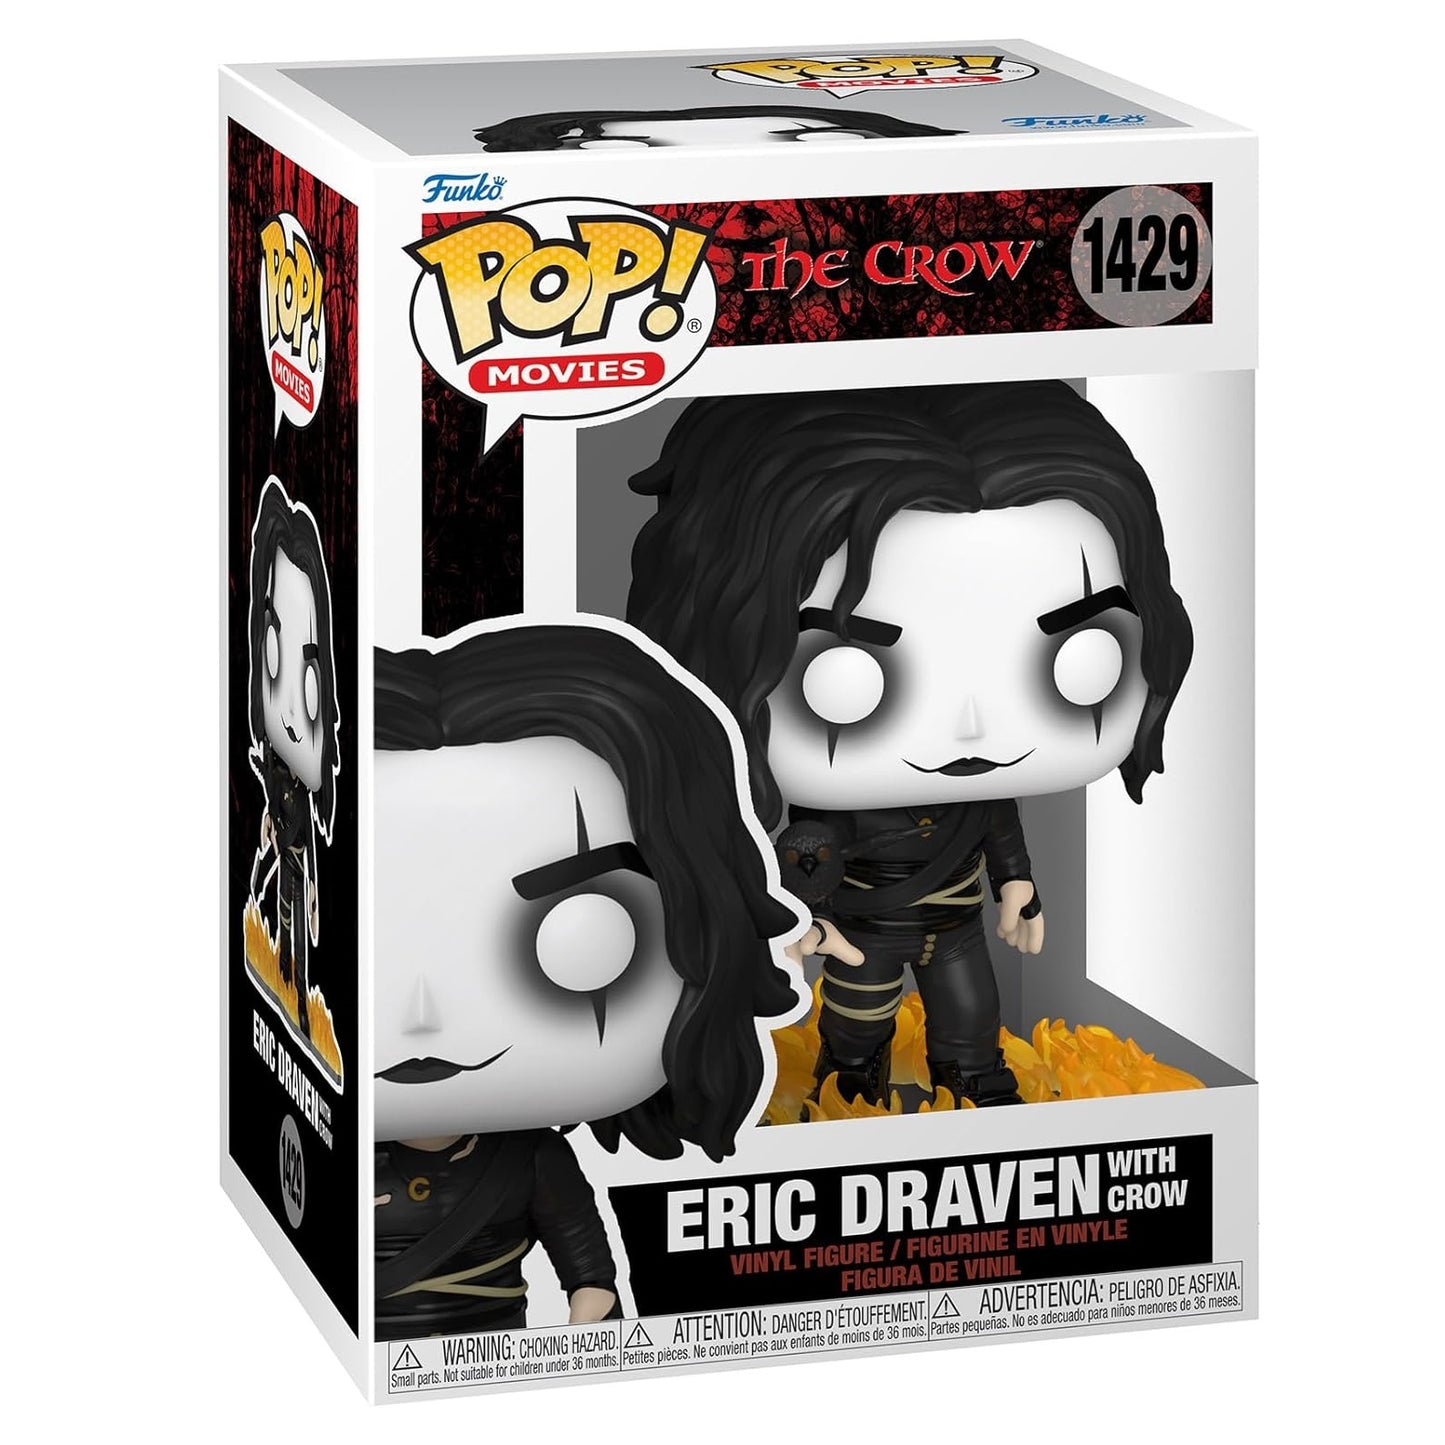 Eric Draven with crow from The Crow vinyl figure